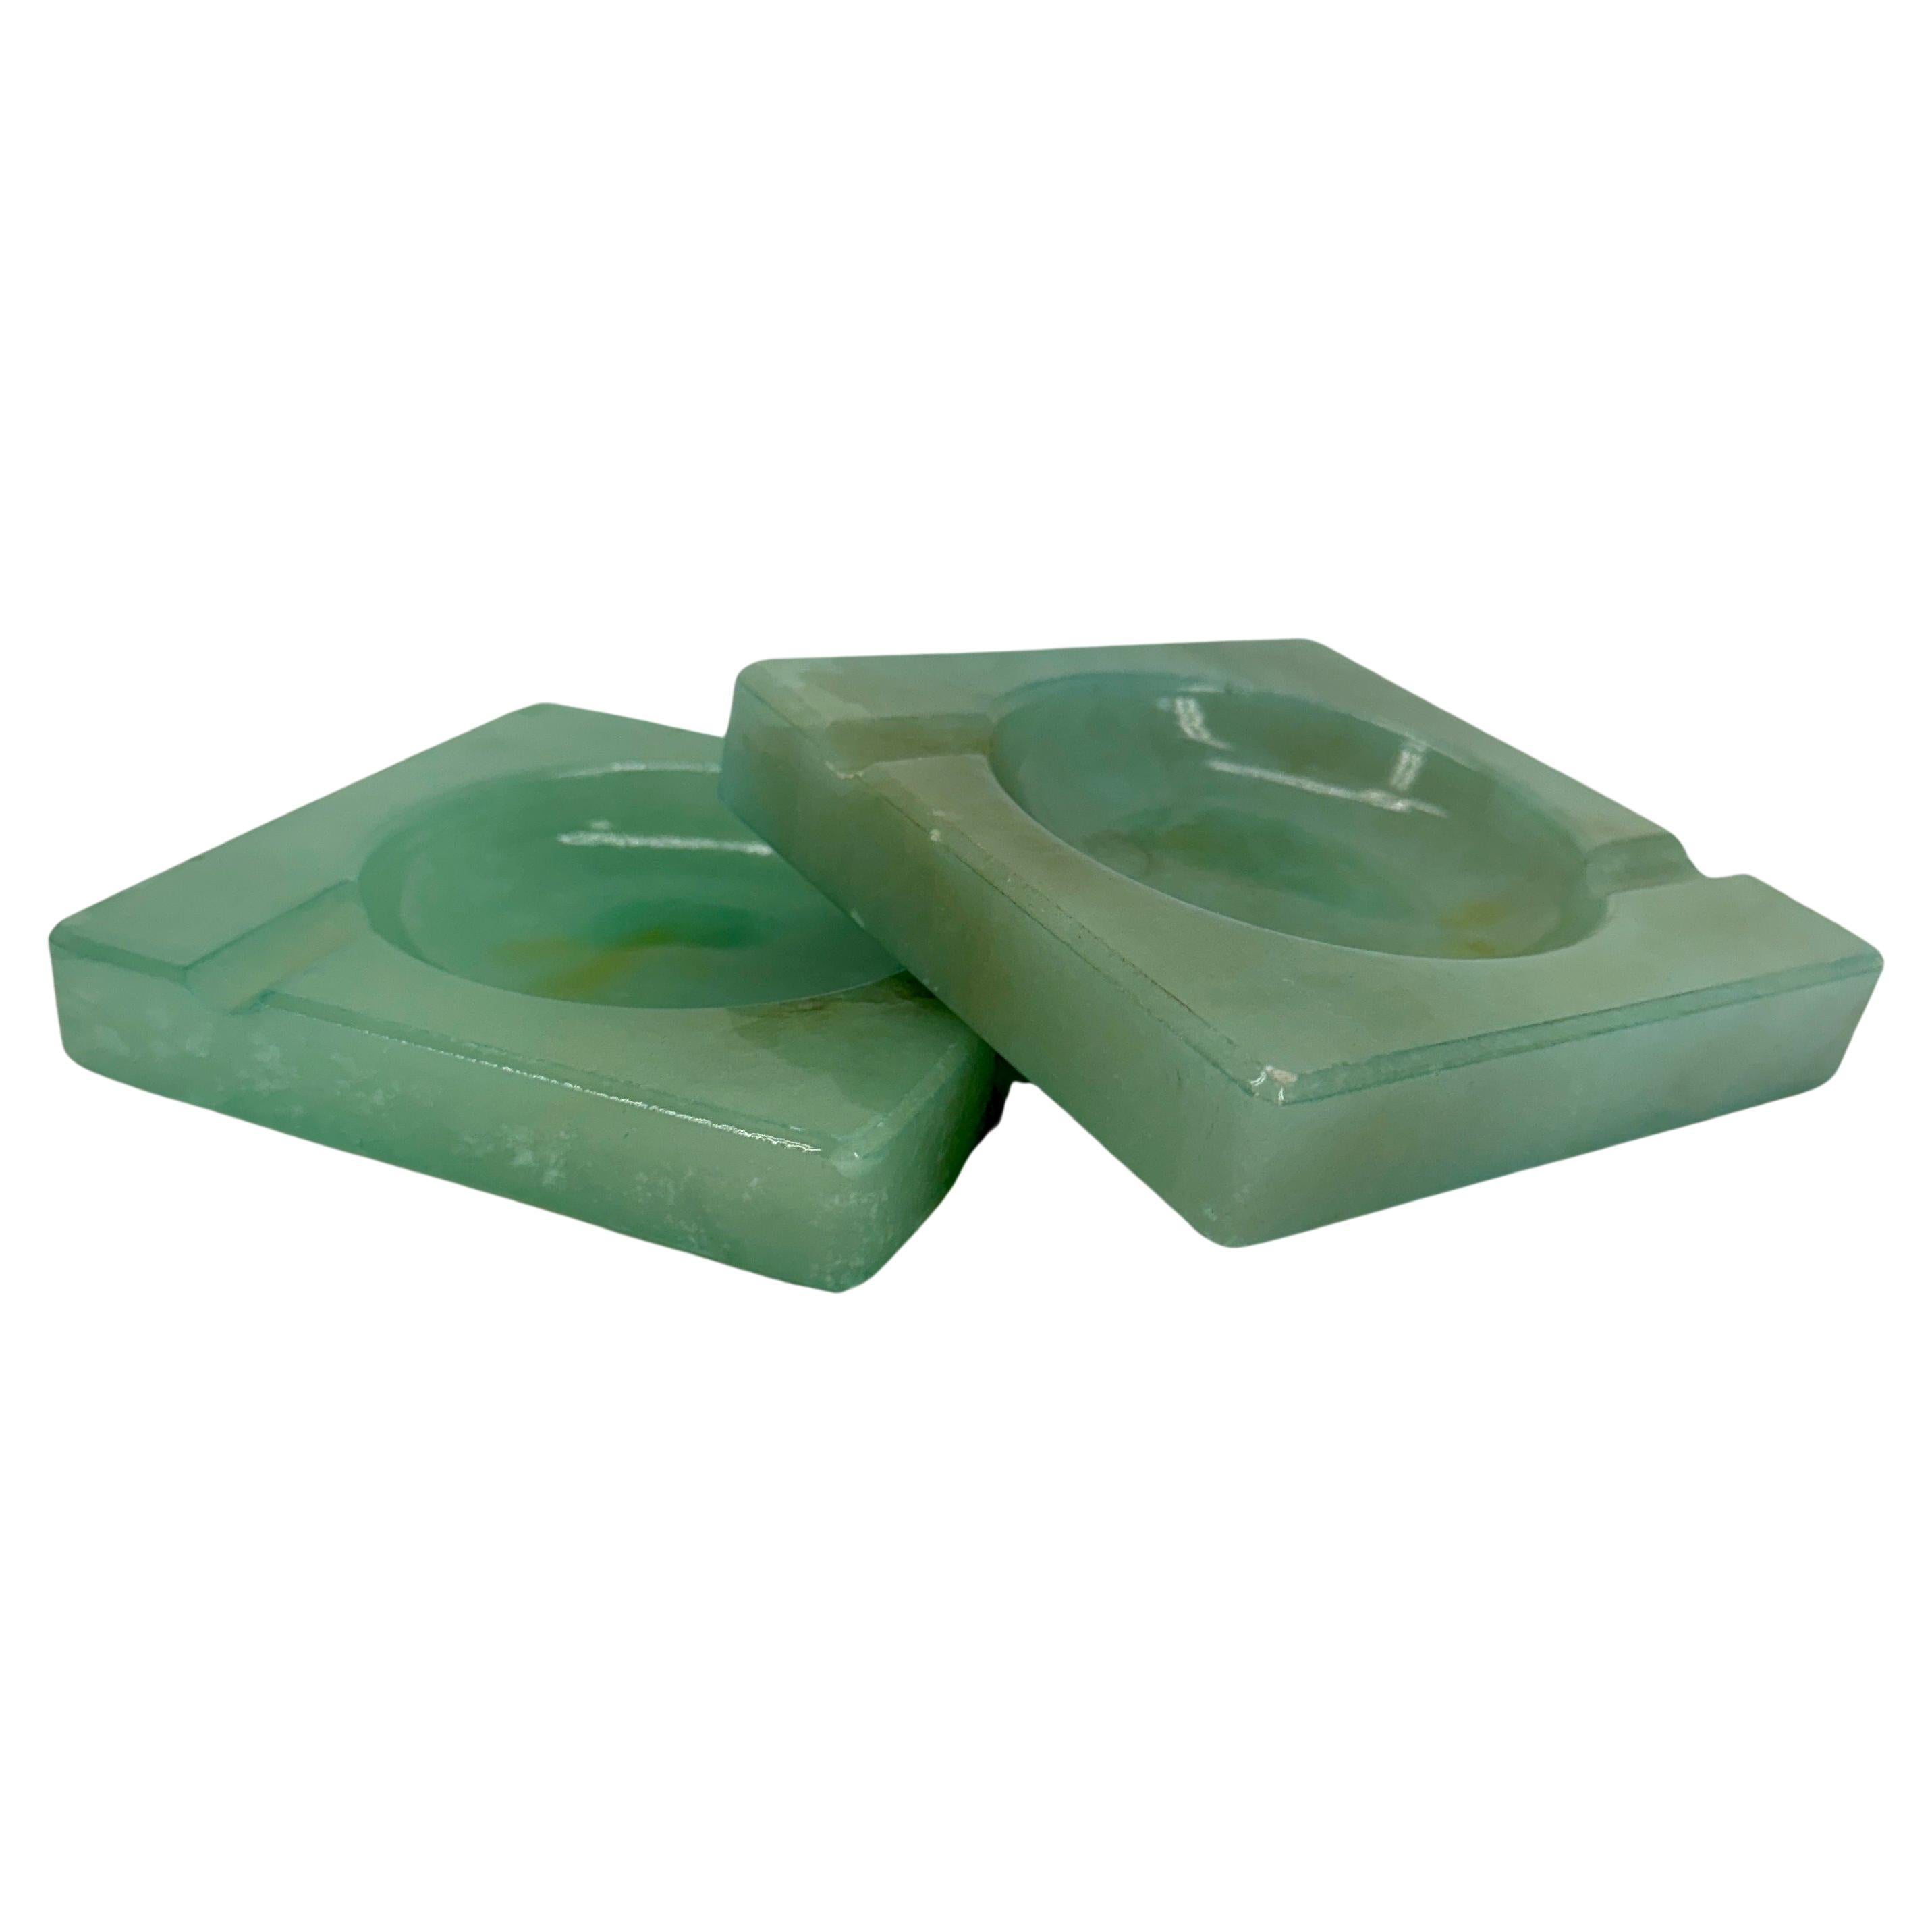 MCM Hand-Carved Green Alabaster Ashtrays, Italy

Classic pair, in a wonderful shade of green, Alabaster ashtrays from Italy. These original decorative objects appear to have never been used. Wonderful set displayed on a MCM coffee table, side table